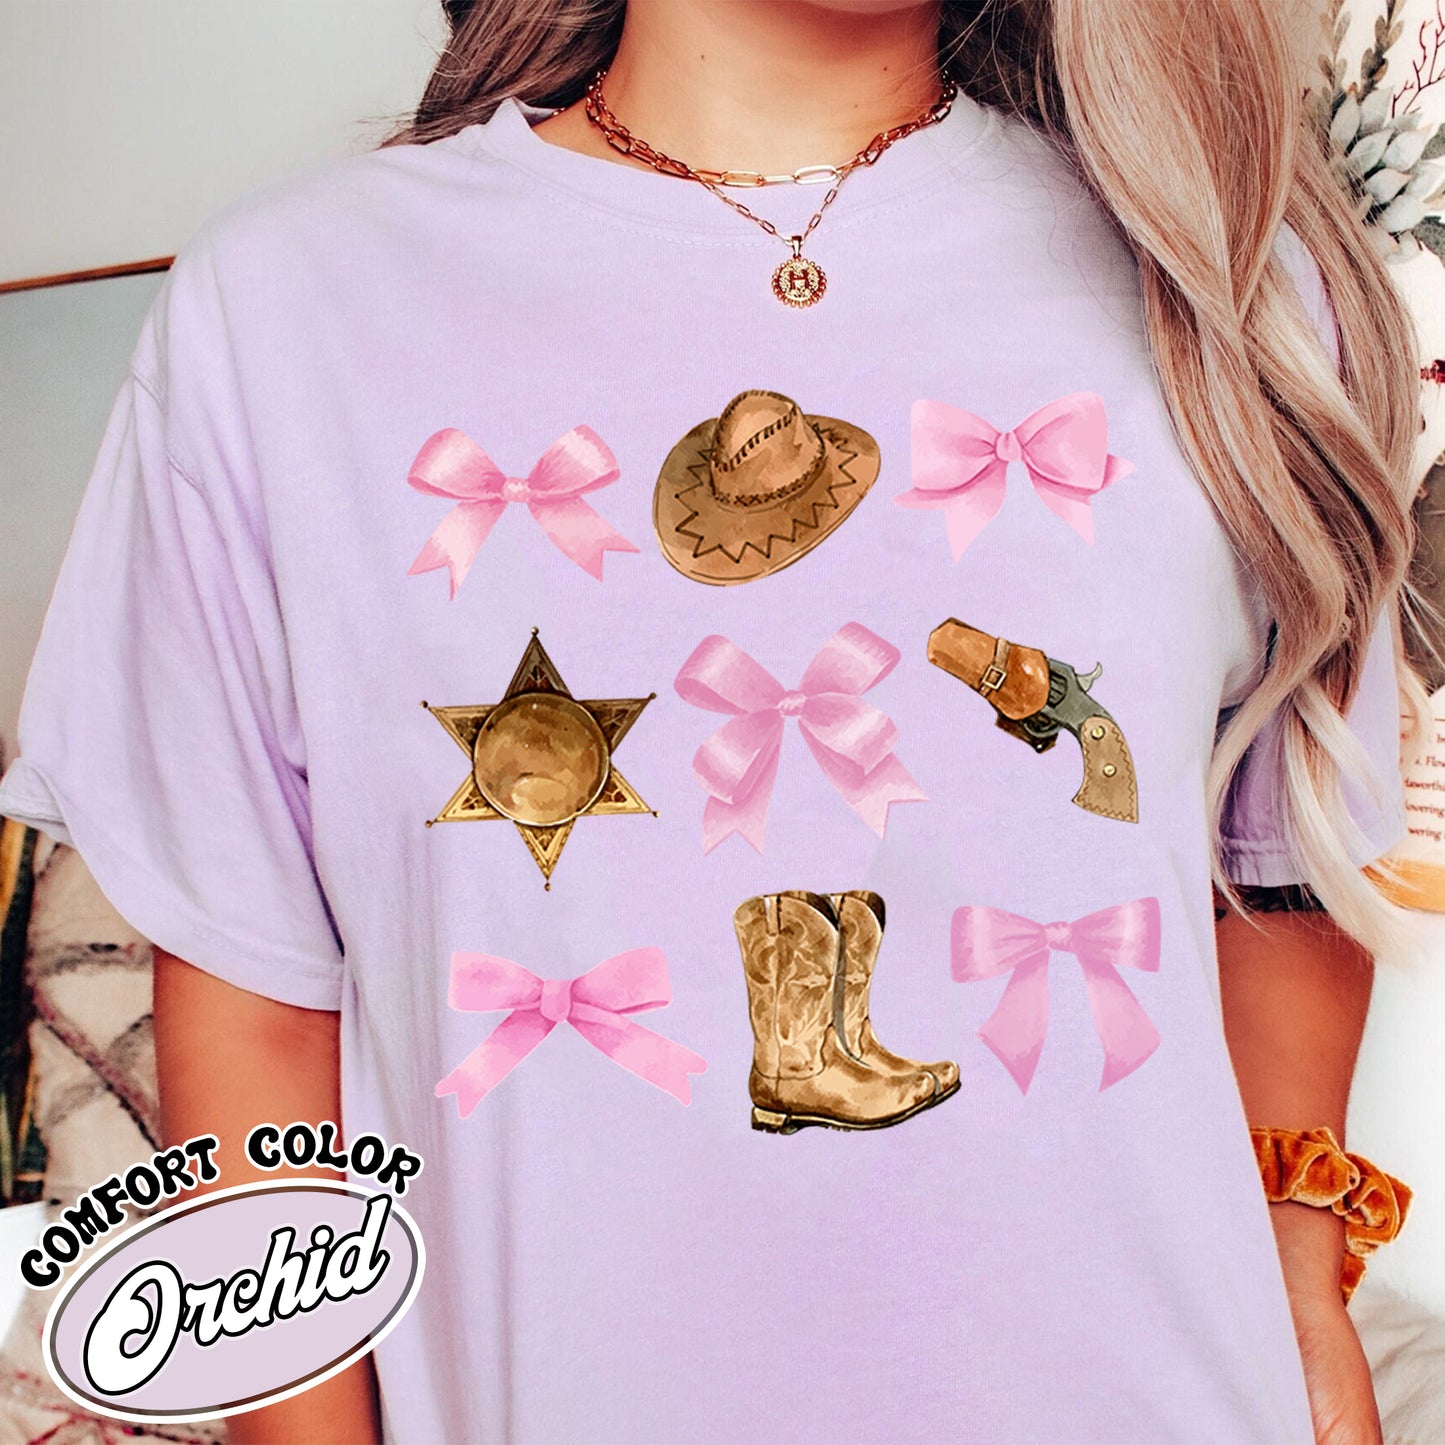 Coquette Cowgirl Comfort Color Shirt, Soft Girl Era, Bows Cowgirl Shirt, Pink Bow Coquette Girly, Oversized Shirt, Soft Girl Aesthetic